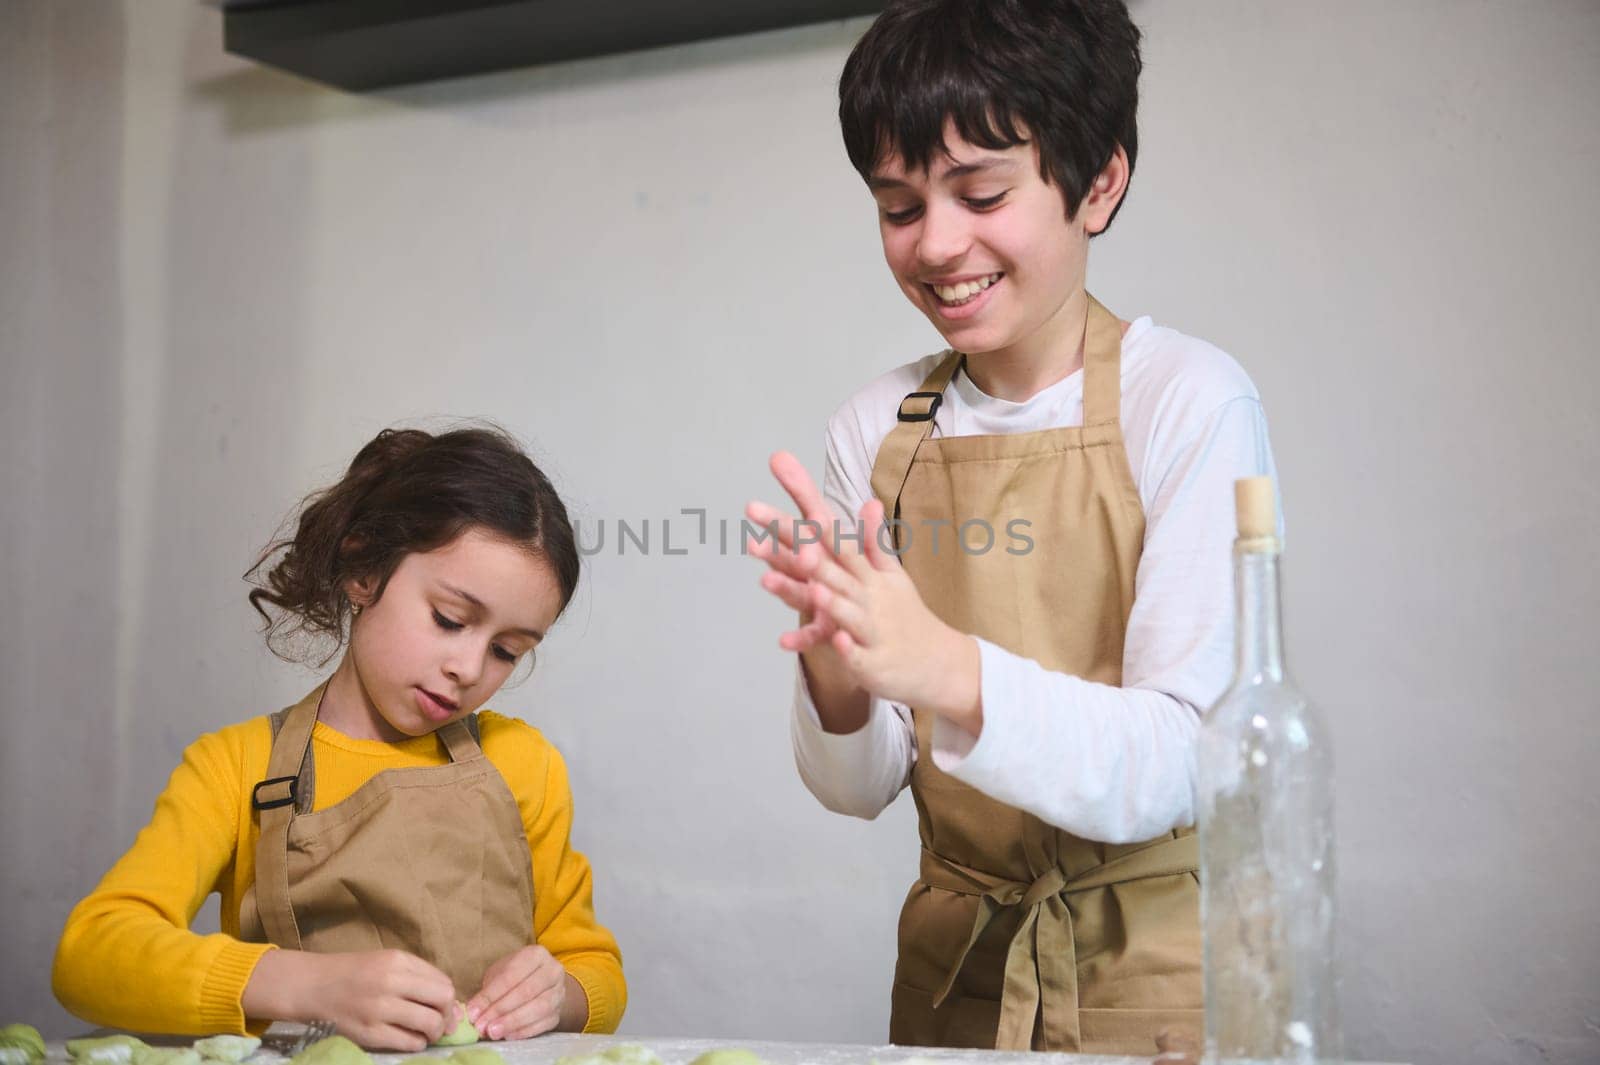 Cute children in beige chef apron, preparing dumplings during a cooking class indoors, standing against a white wall background